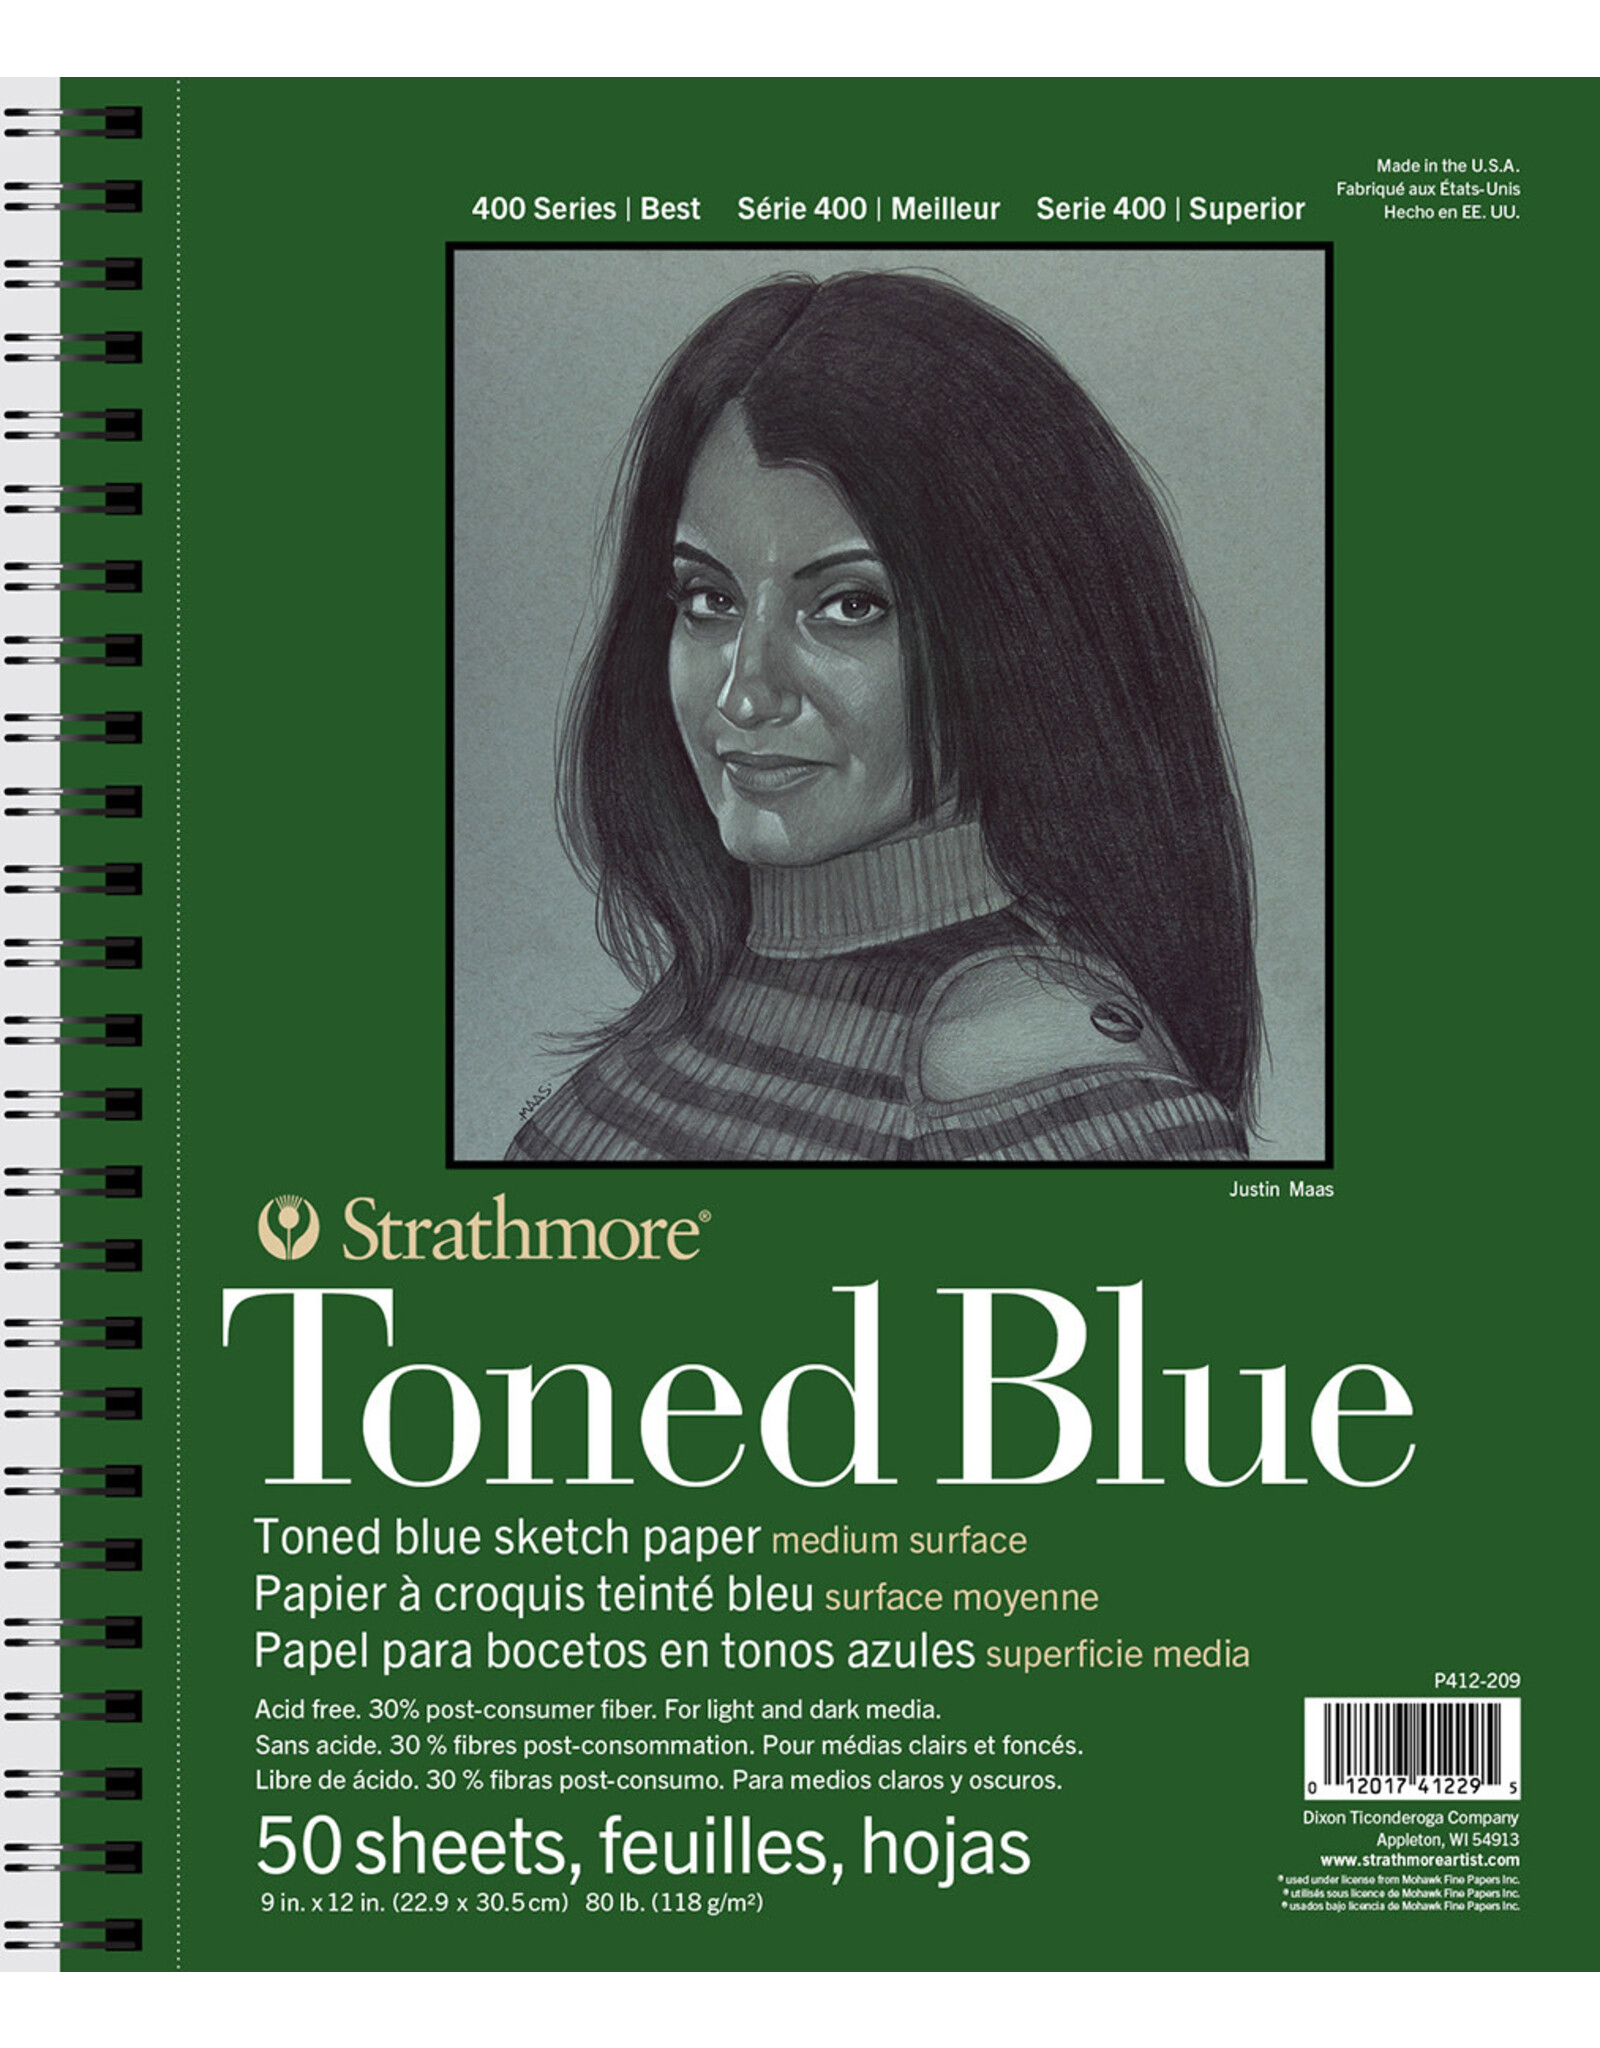 Strathmore Strathmore 400 Toned Blue Sketch Pad, 50 Sheets, 9” x 12”